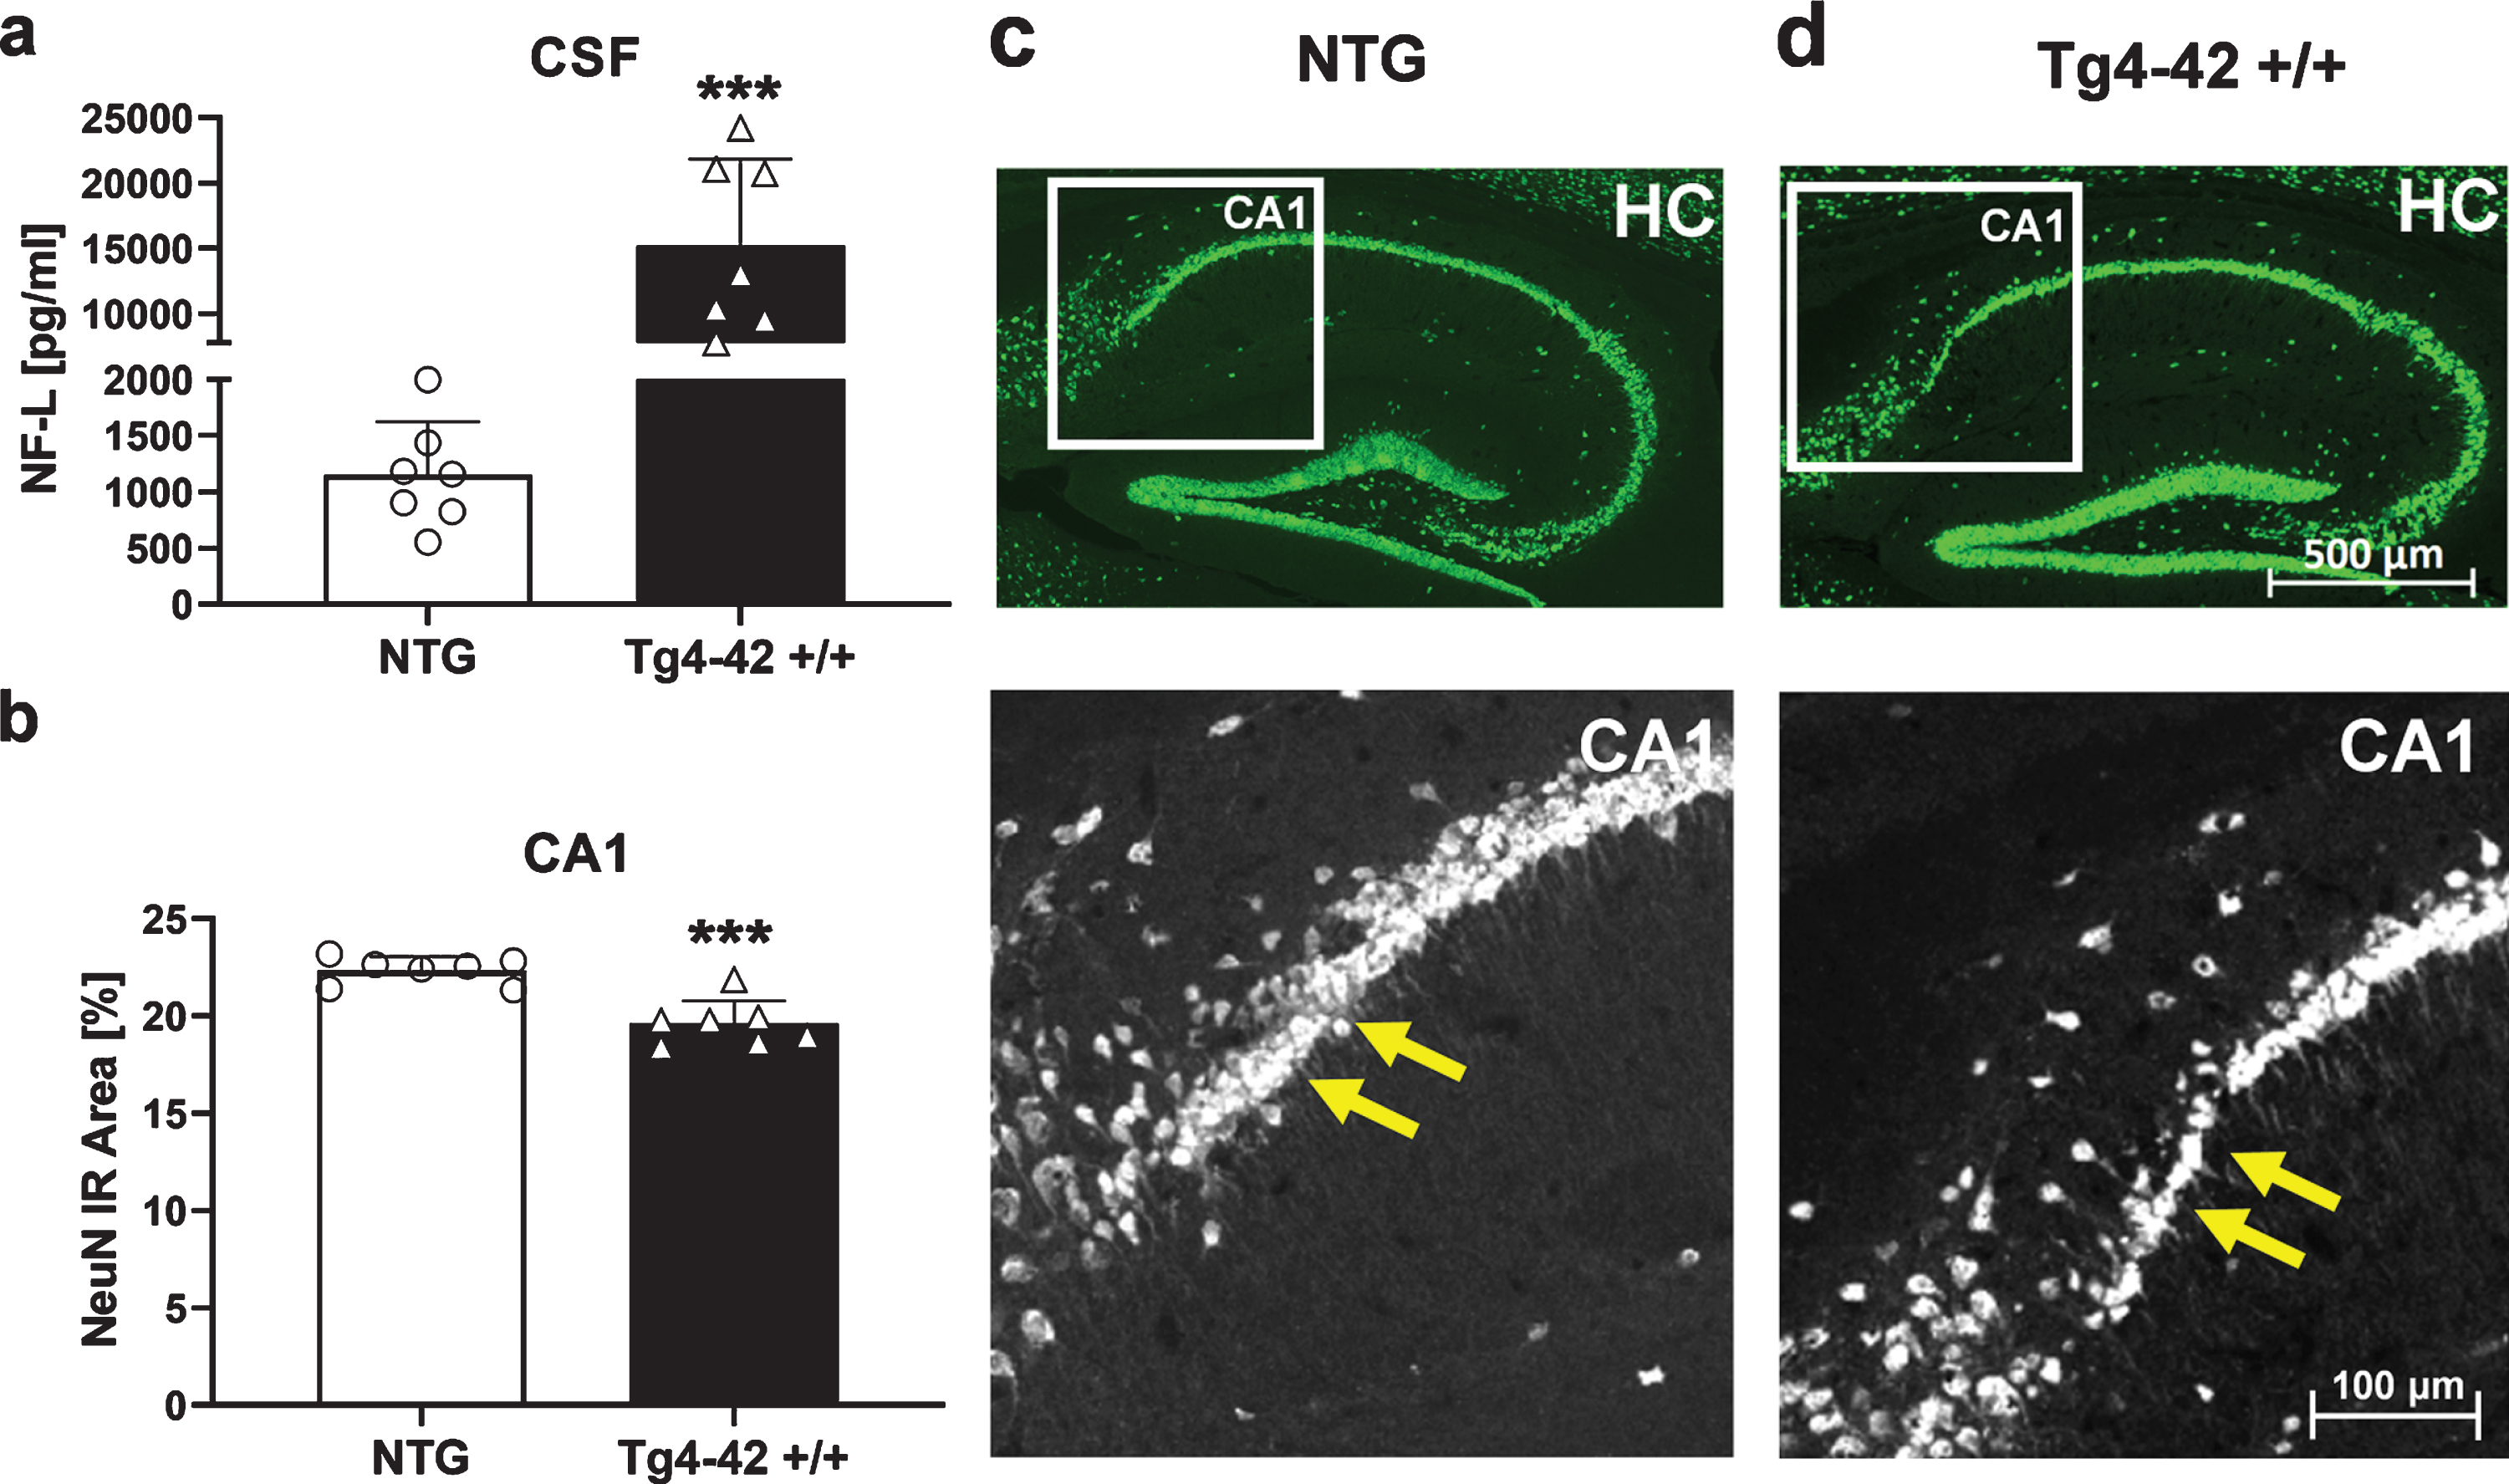 Quantification of neurons in the hippocampus of 9-month-old Tg4-42 +/+ mice. a) Murine neurofilament light chain levels (NF-L) in CSF samples as pg/ml. b) NeuN expression levels labeling neurons in the proximal CA1 region of the hippocampus as immunoreactive (IR) area in percent. a, b) n = 7 per group. Mean + SEM. Unpaired t-test. ***p < 0.001. c, d) Representative images of NeuN labeling in hippocampus samples of 9-month-old Tg4-42 +/+ and non-transgenic mice (NTG). Yellow arrows indicate region of neuronal loss.